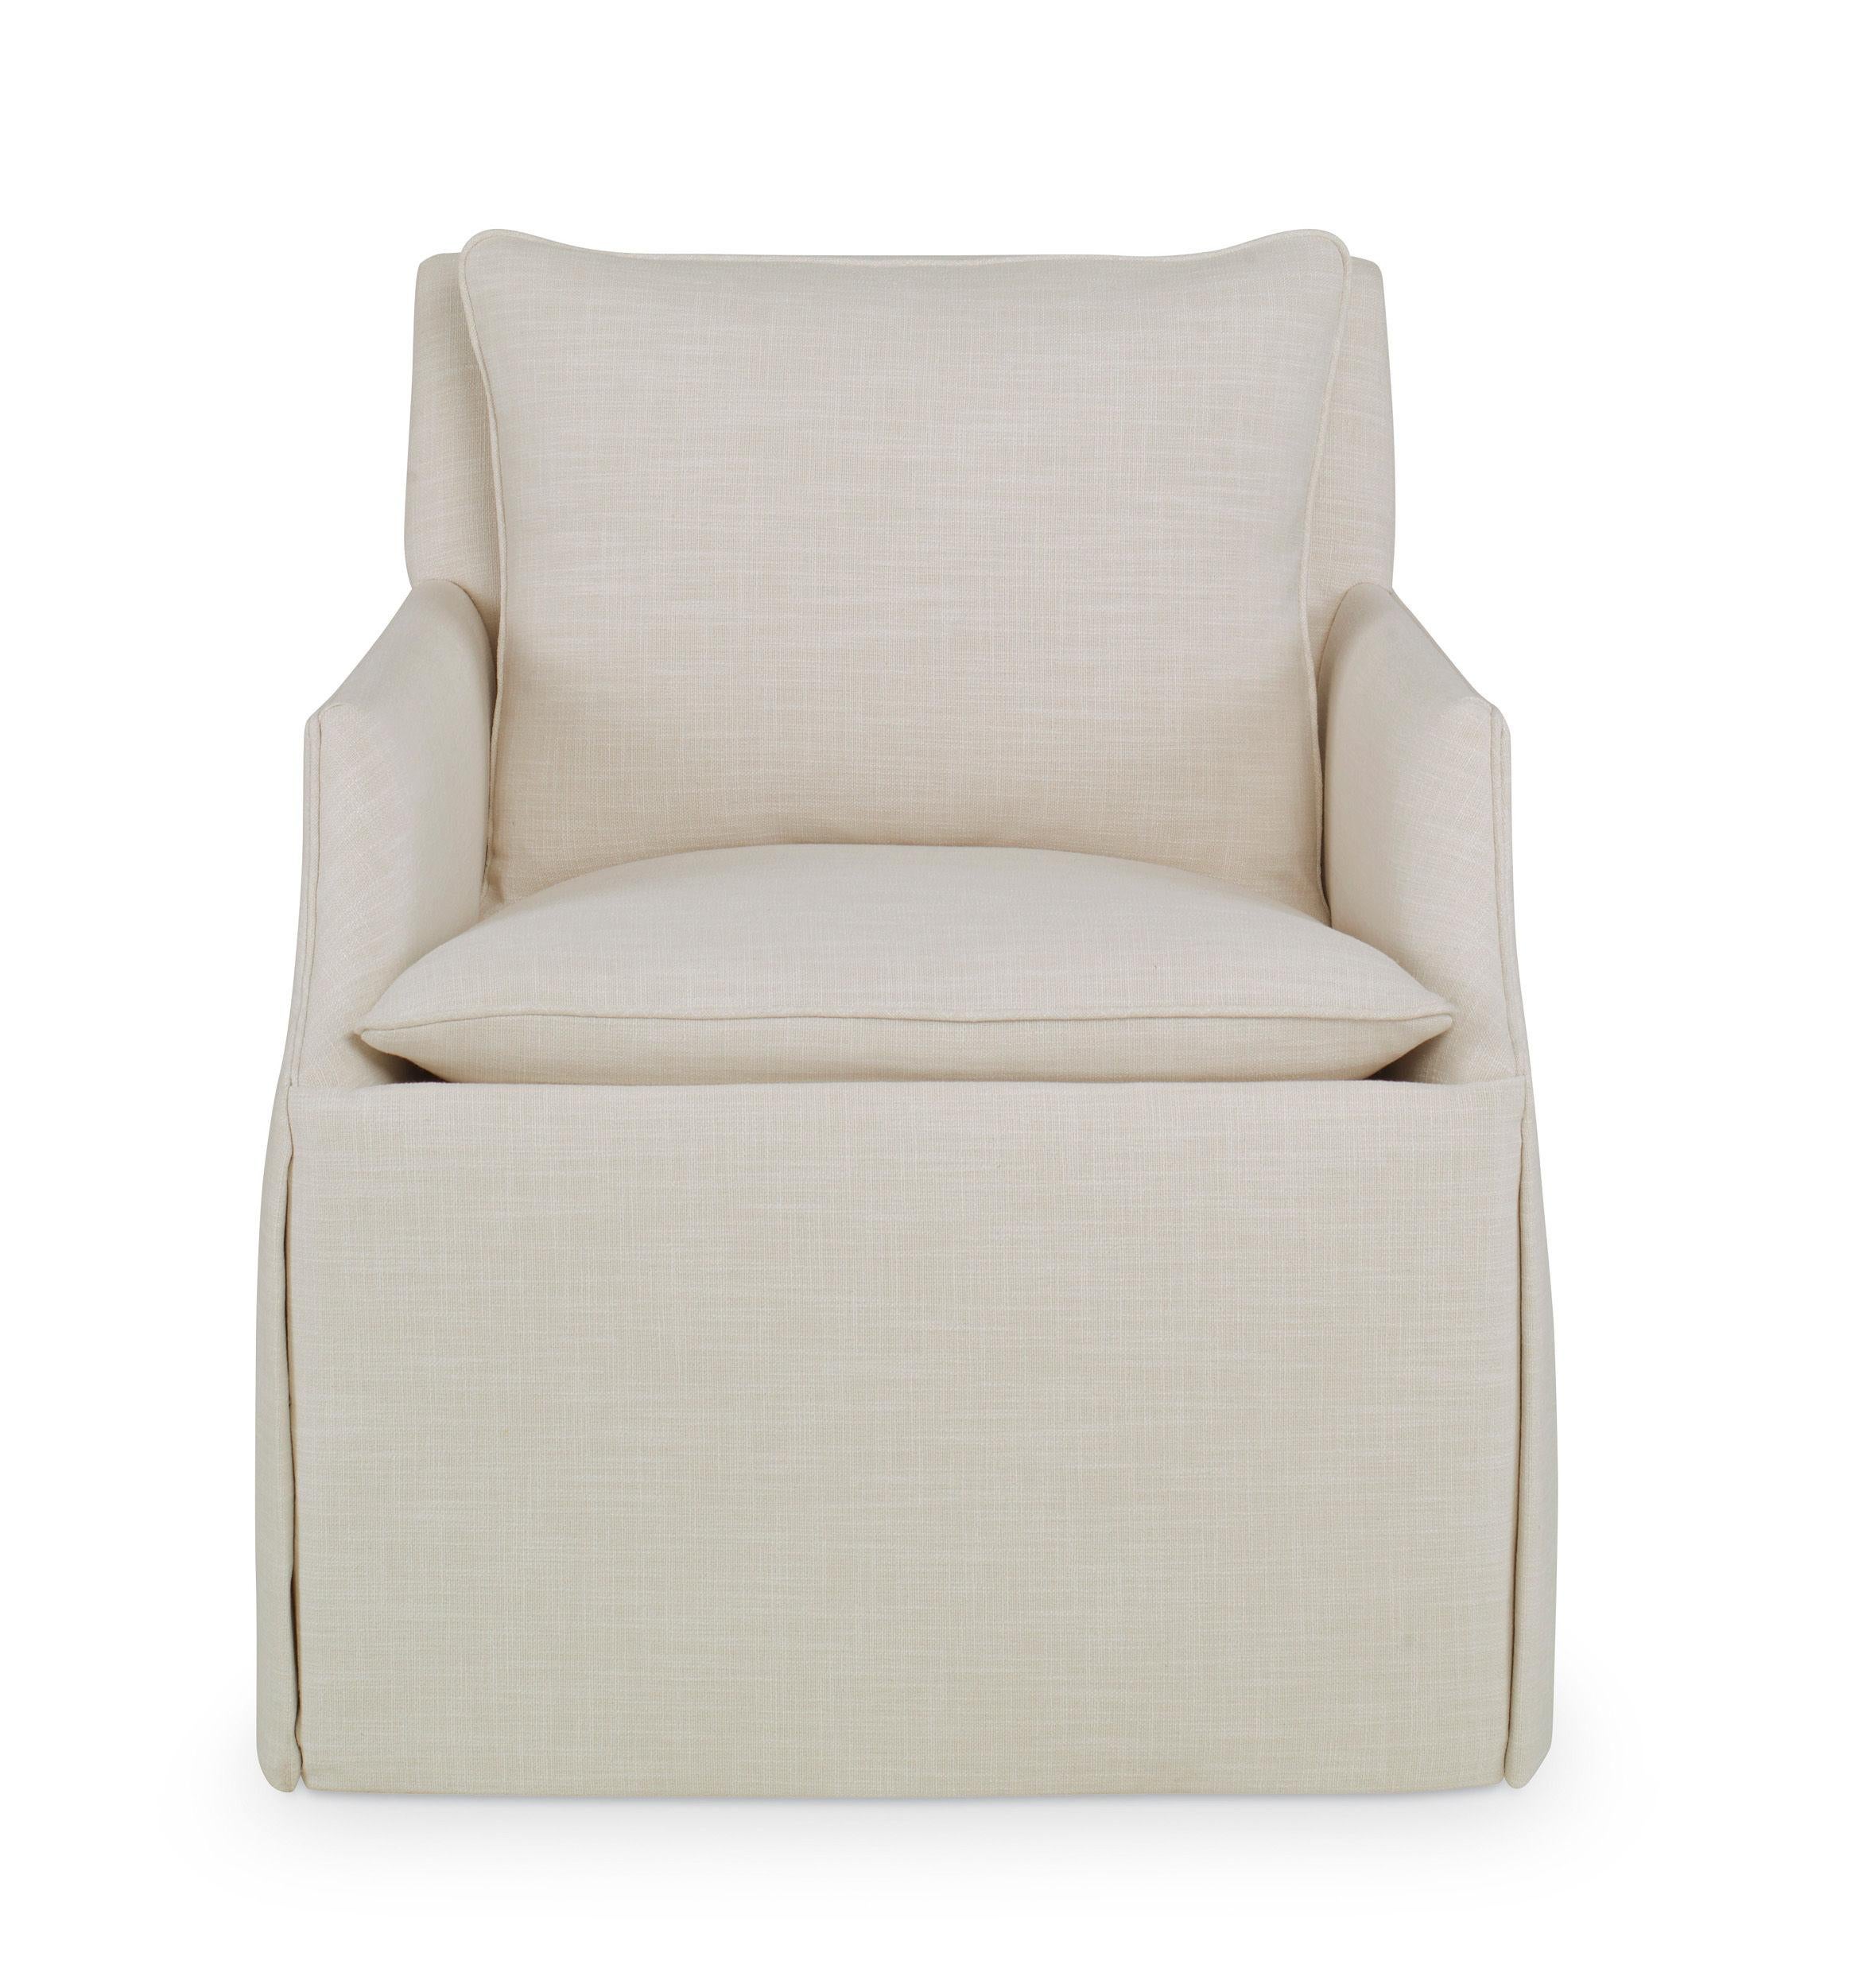 Skirted Murcia swivel chair (FS463S) upholstered in Kravet 31507.101. Made in the USA.

Ready to ship.